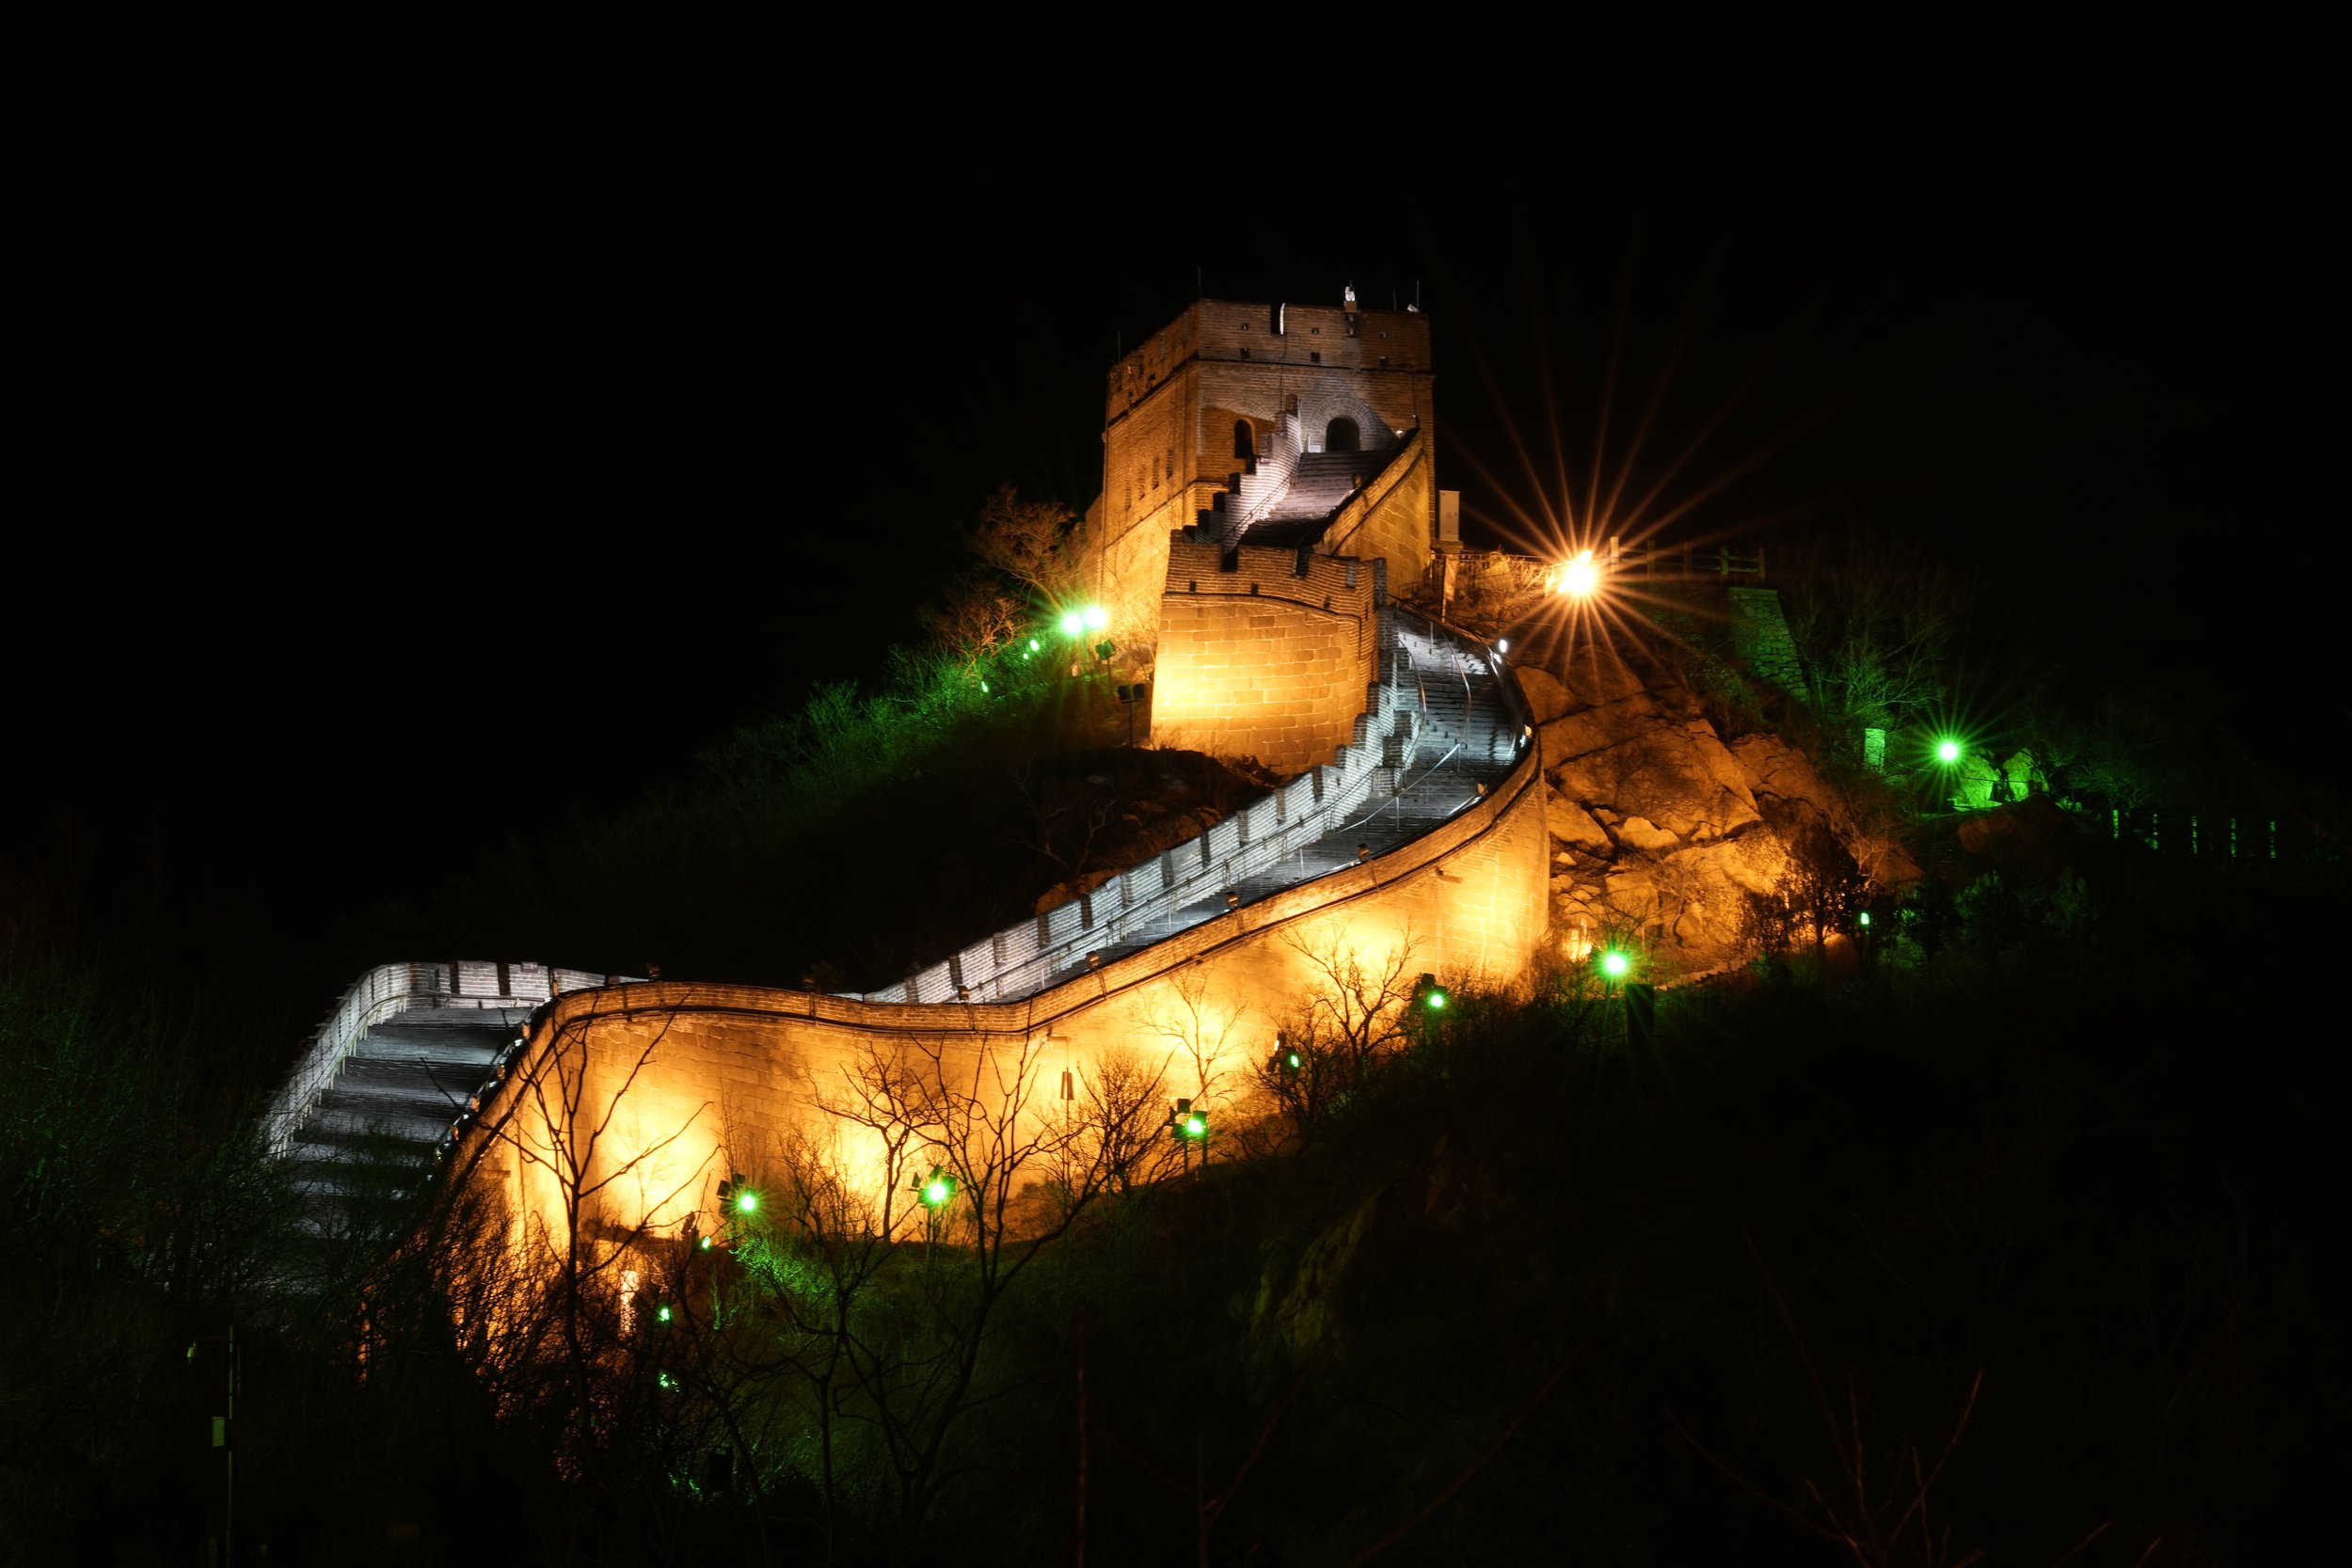  The Badaling section of the Great Wall of China is lit on the outskirts of Beijing on Tuesday, Feb. 8, 2022, in Beijing. (AP Photo/Ng Han Guan) 